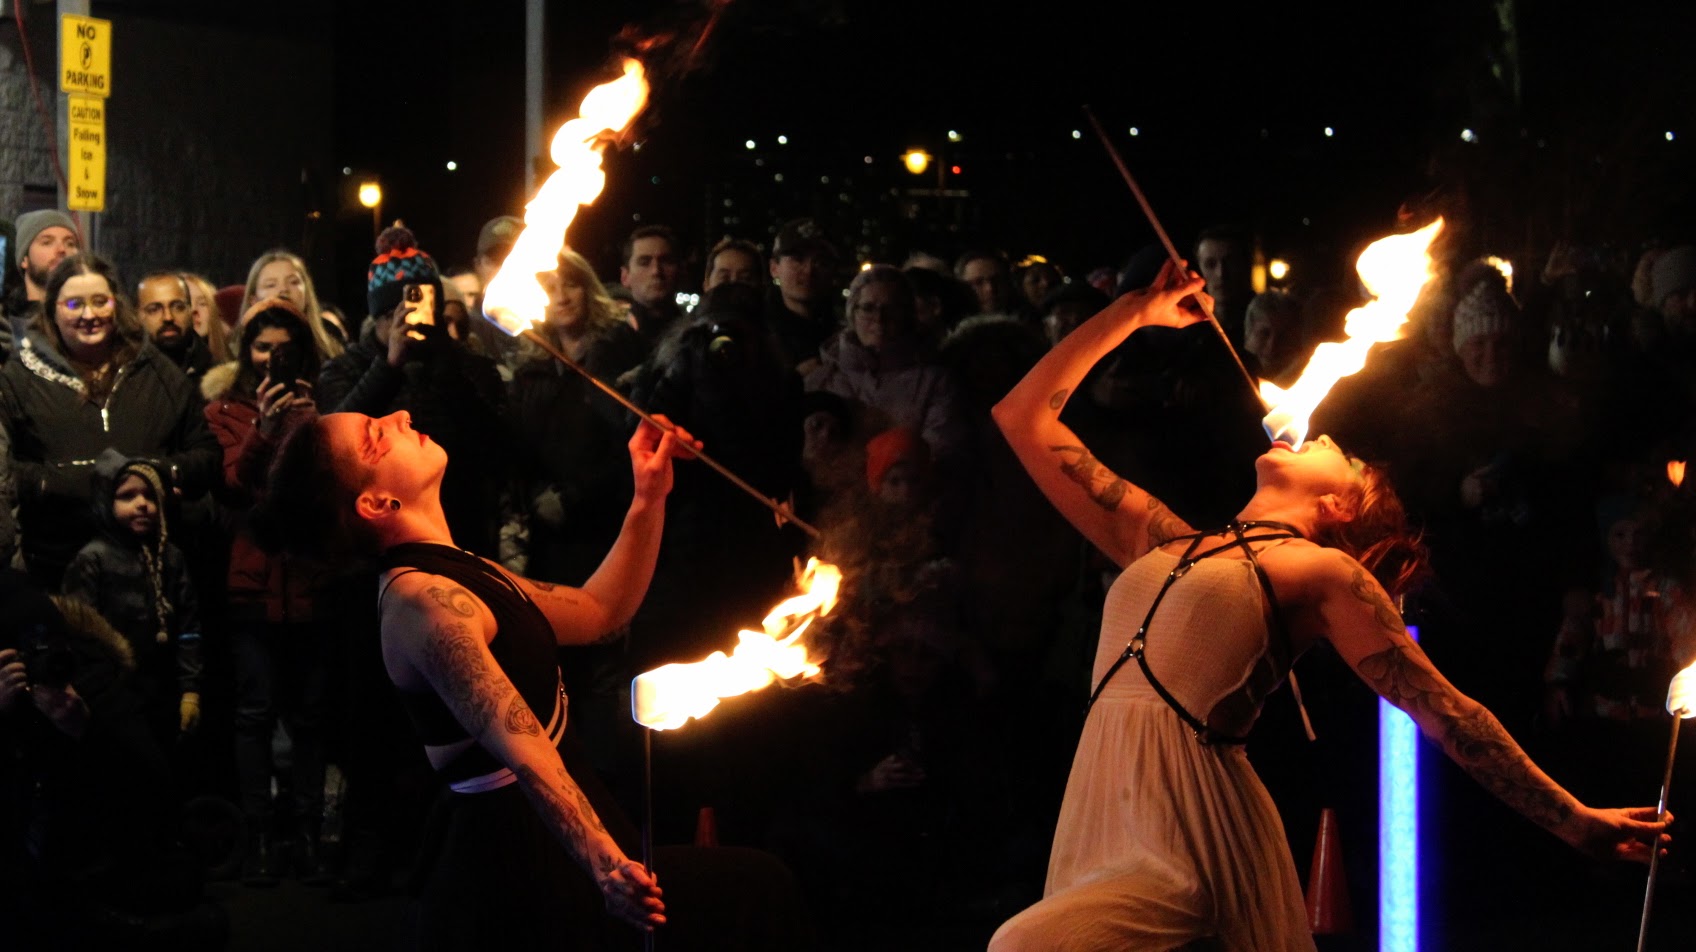 Mizz Anthrope (l) and Lumen Lux (r) perform at the Downtown Dartmouth Ice Festival at Halifax’s Alderney Landing on Jan. 28, 2023. They have trained for years to become fire performers.